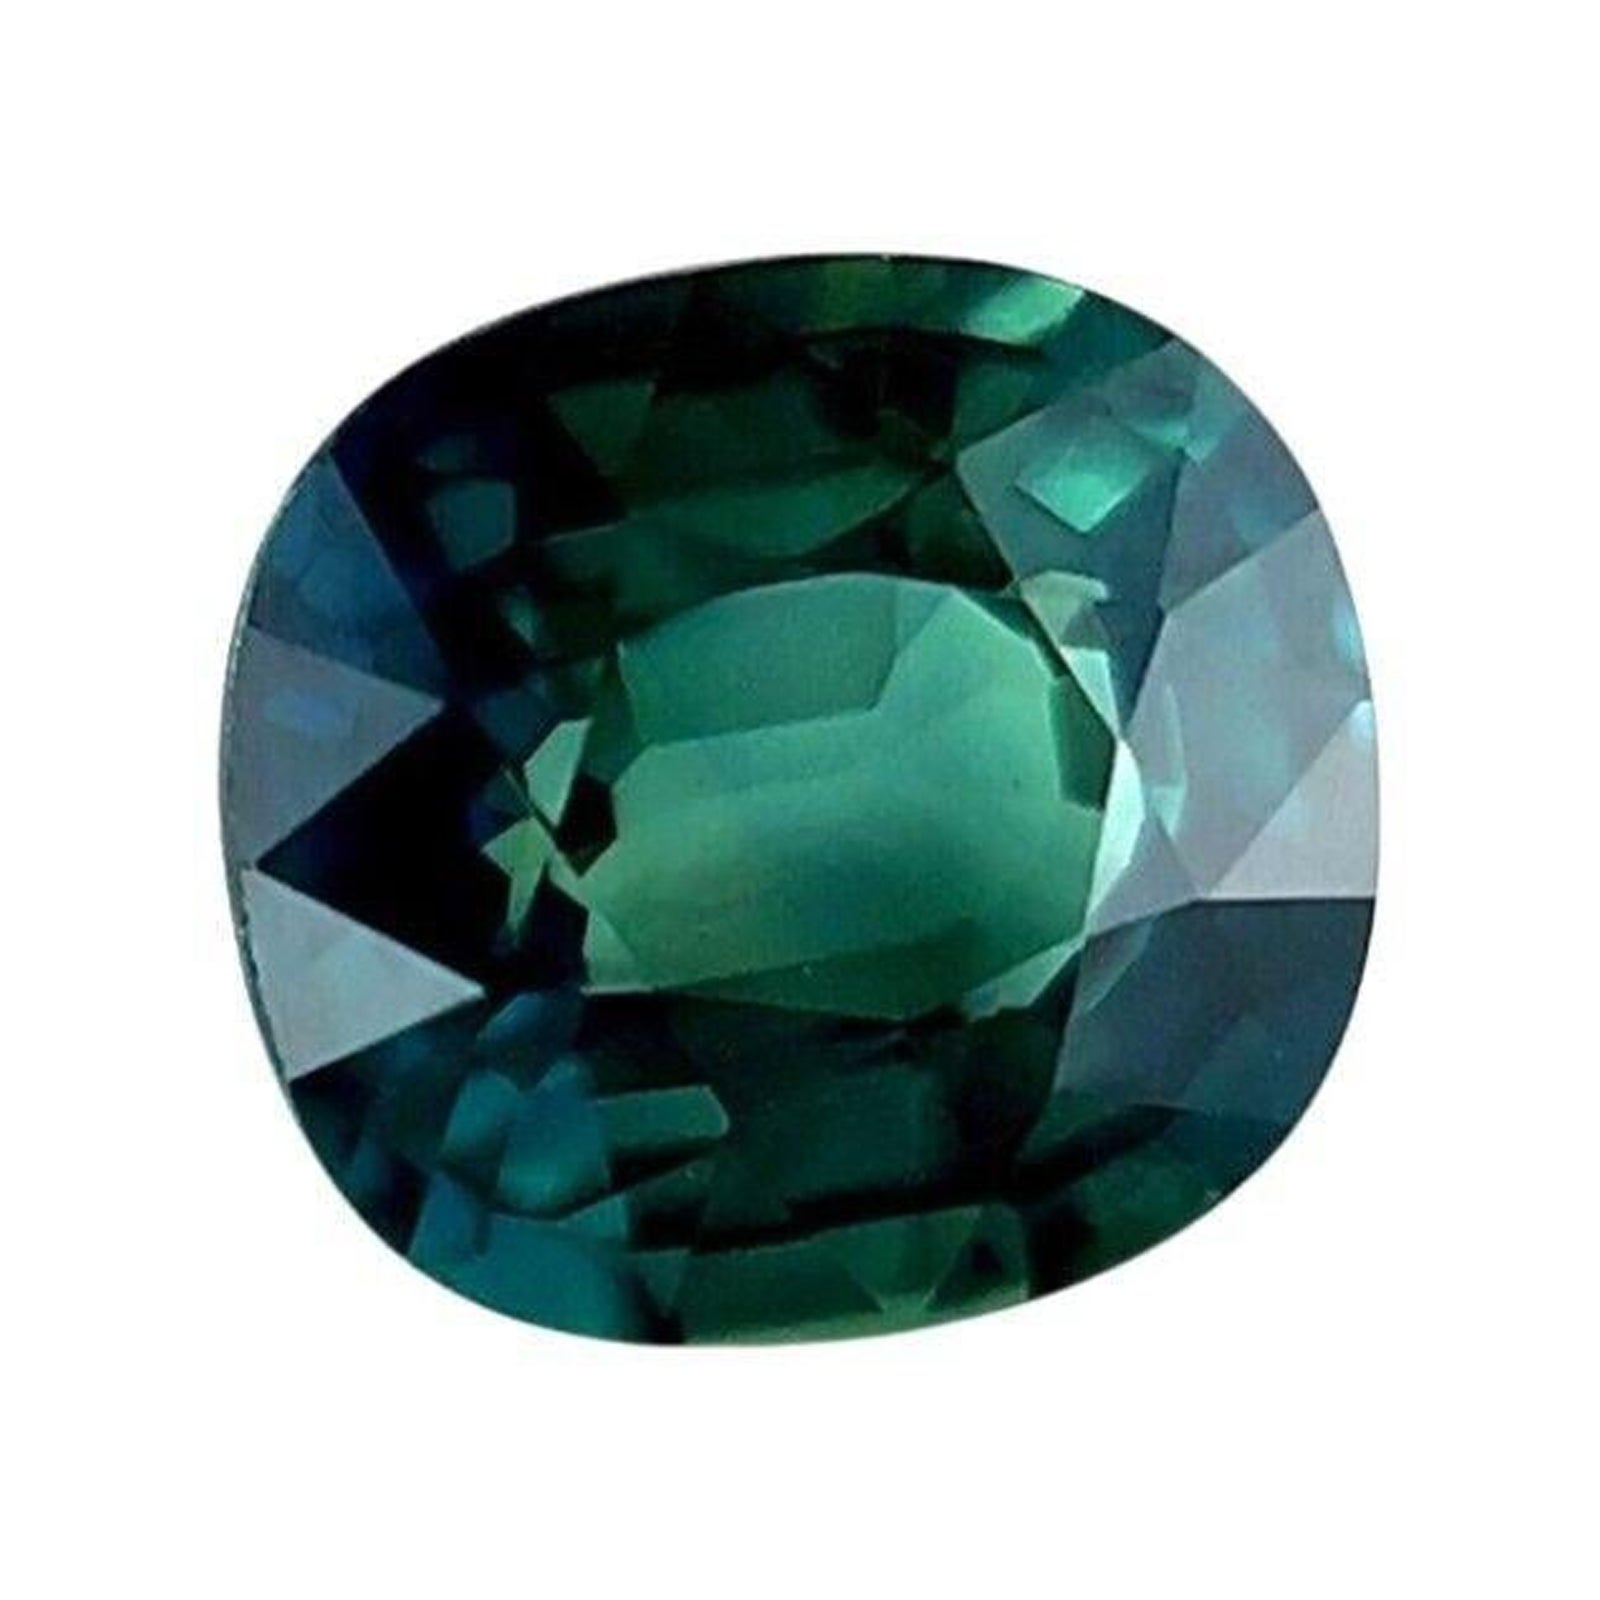 1.19Ct GIA Certified Green Blue Teal Untreated Sapphire Natural Cushion Cut Gem For Sale